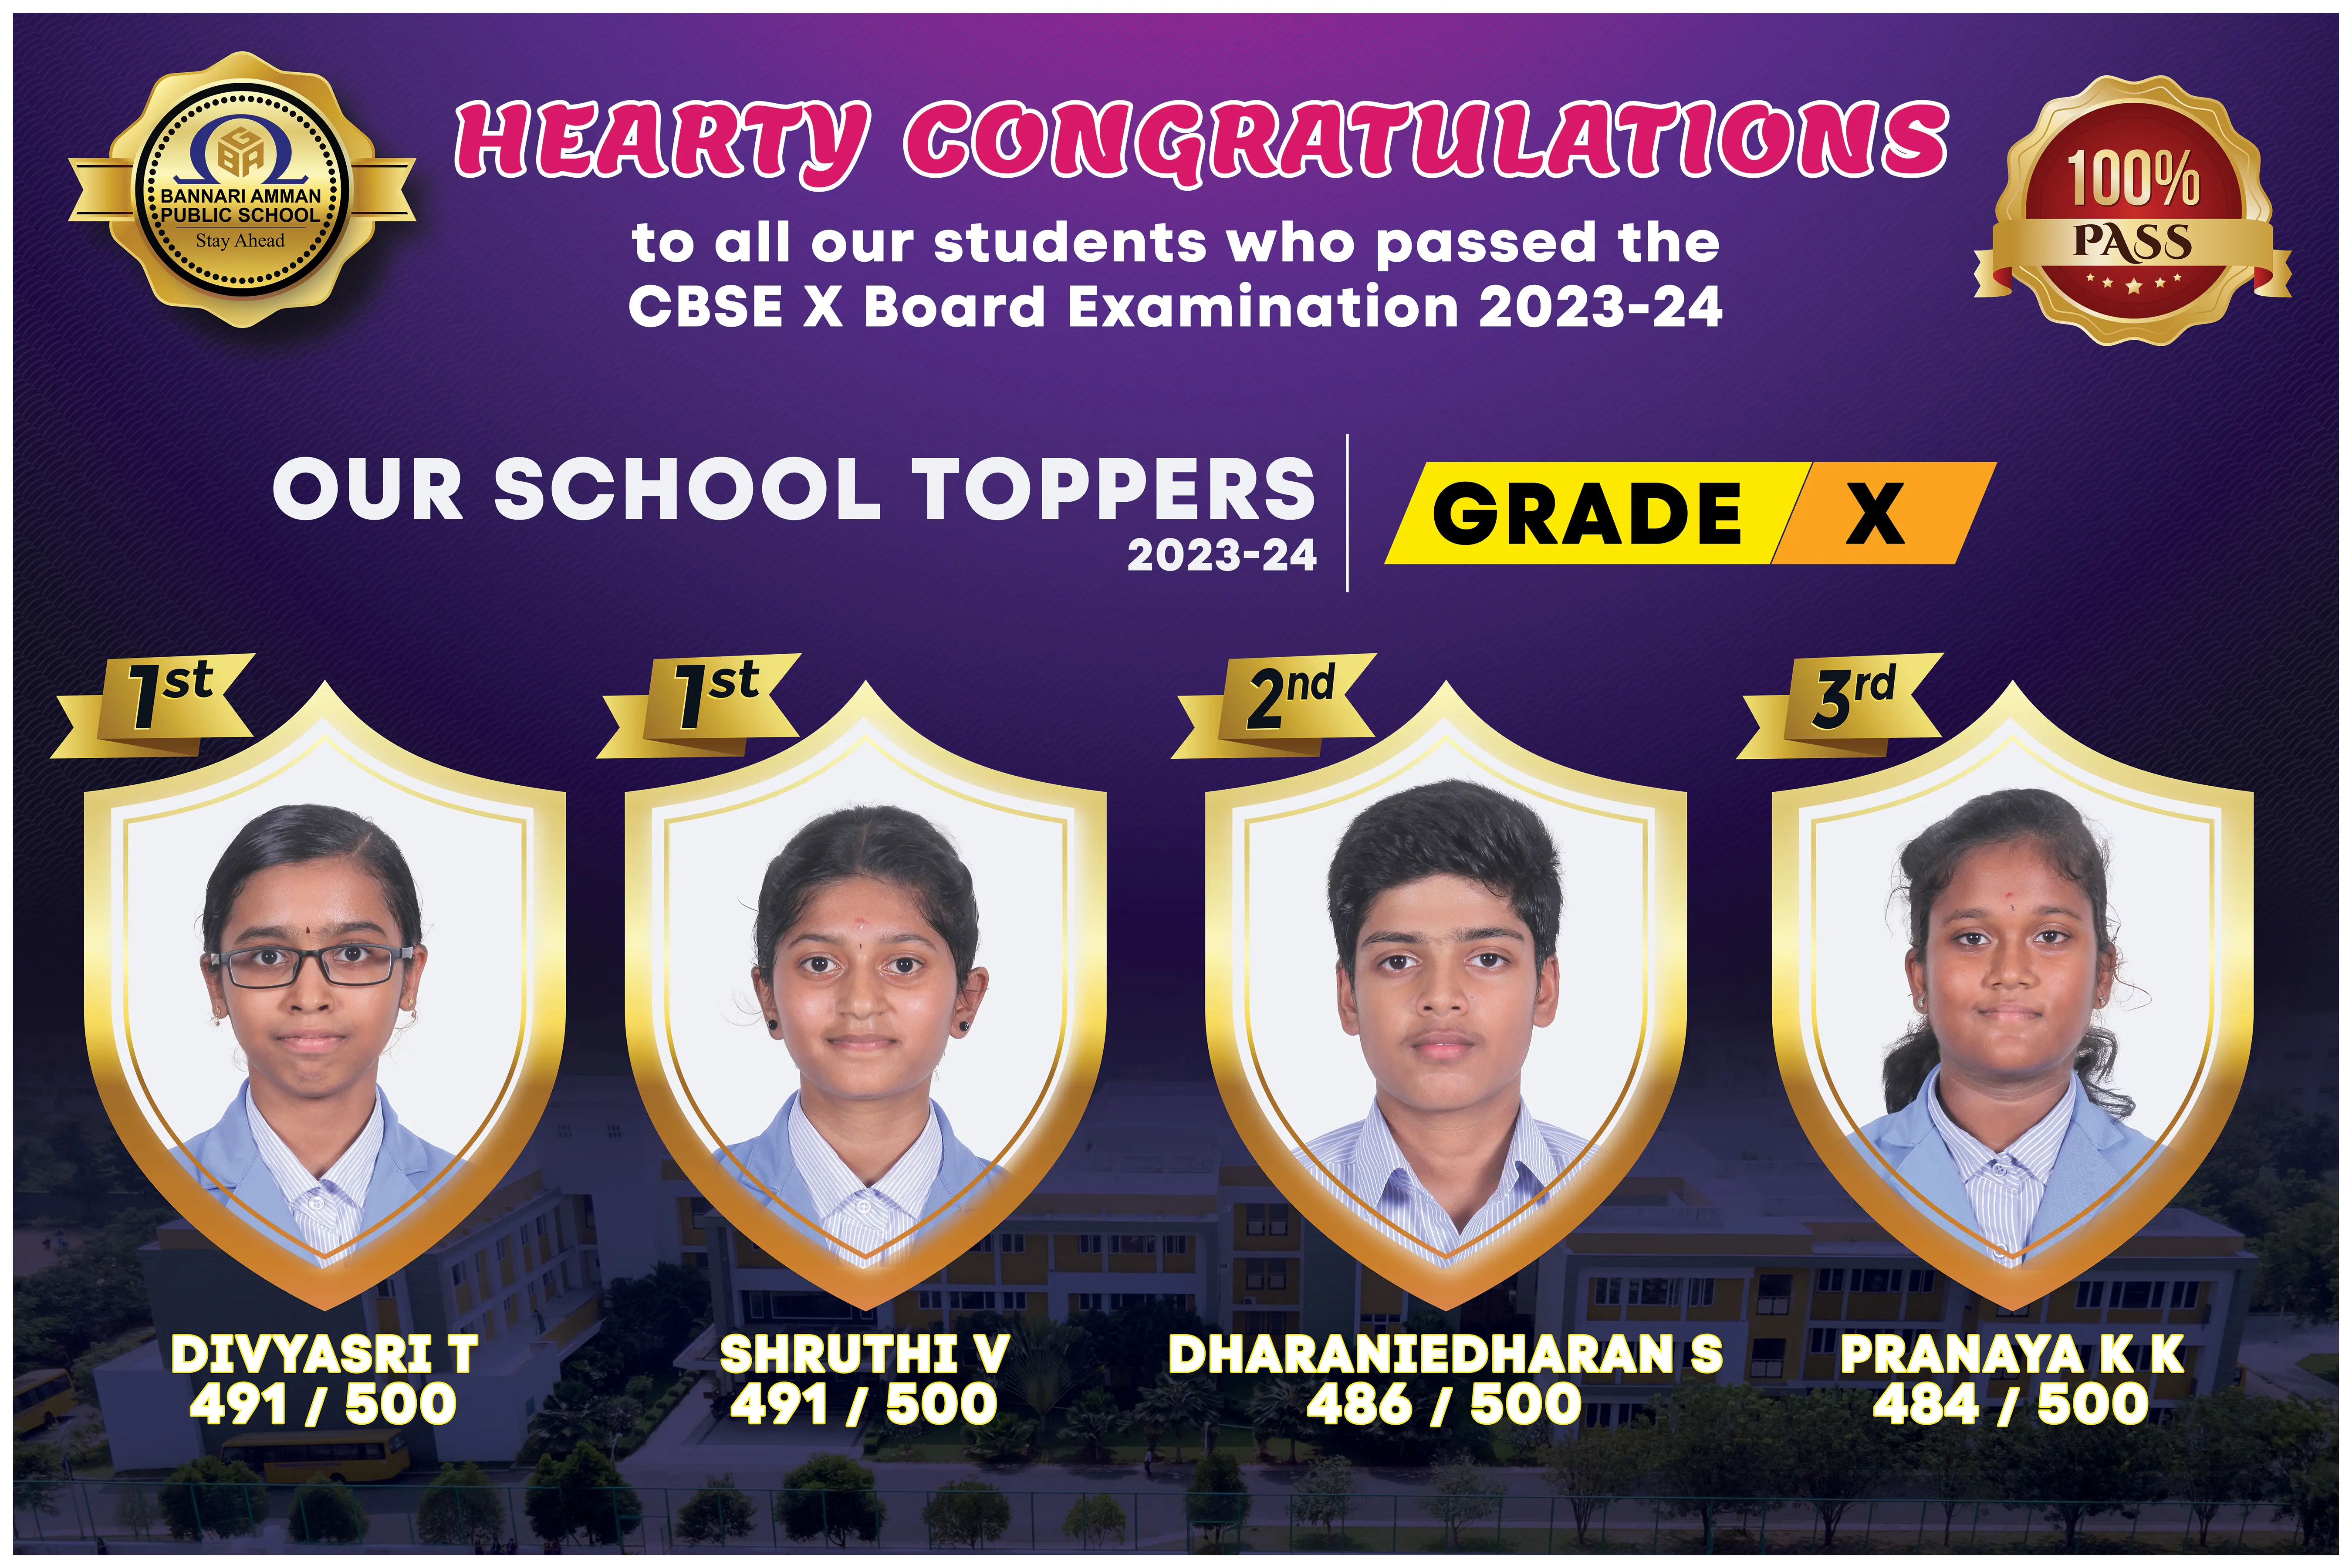 BAPS Celebrating Our School Toppers X Board Examination 2023-2024